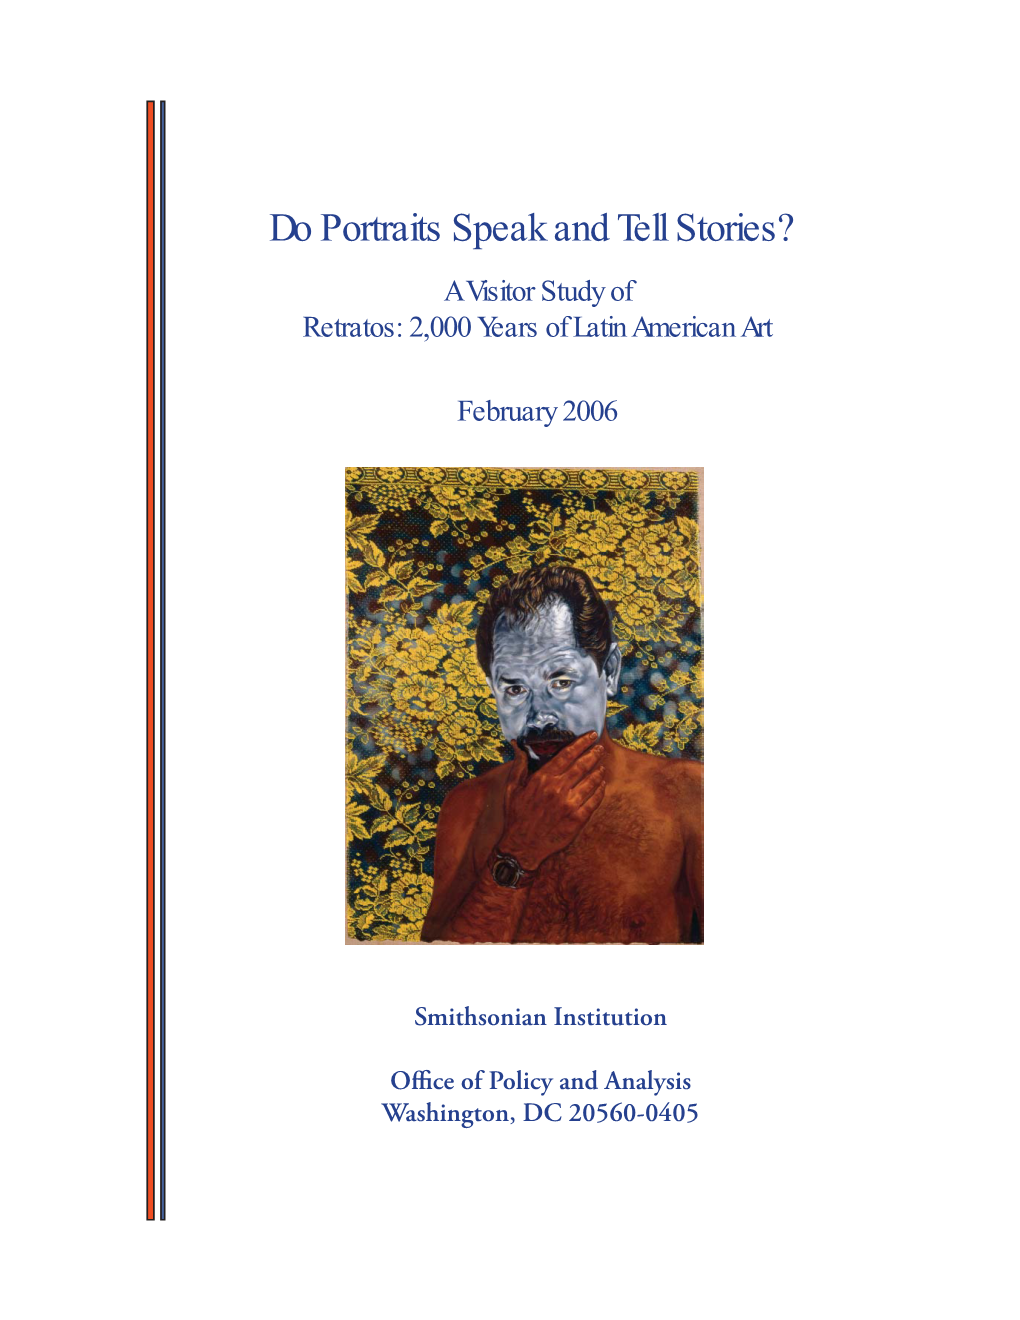 Do Portraits Speak and Tell Stories? a Visitor Study of Retratos: 2,000 Years of Latin American Art